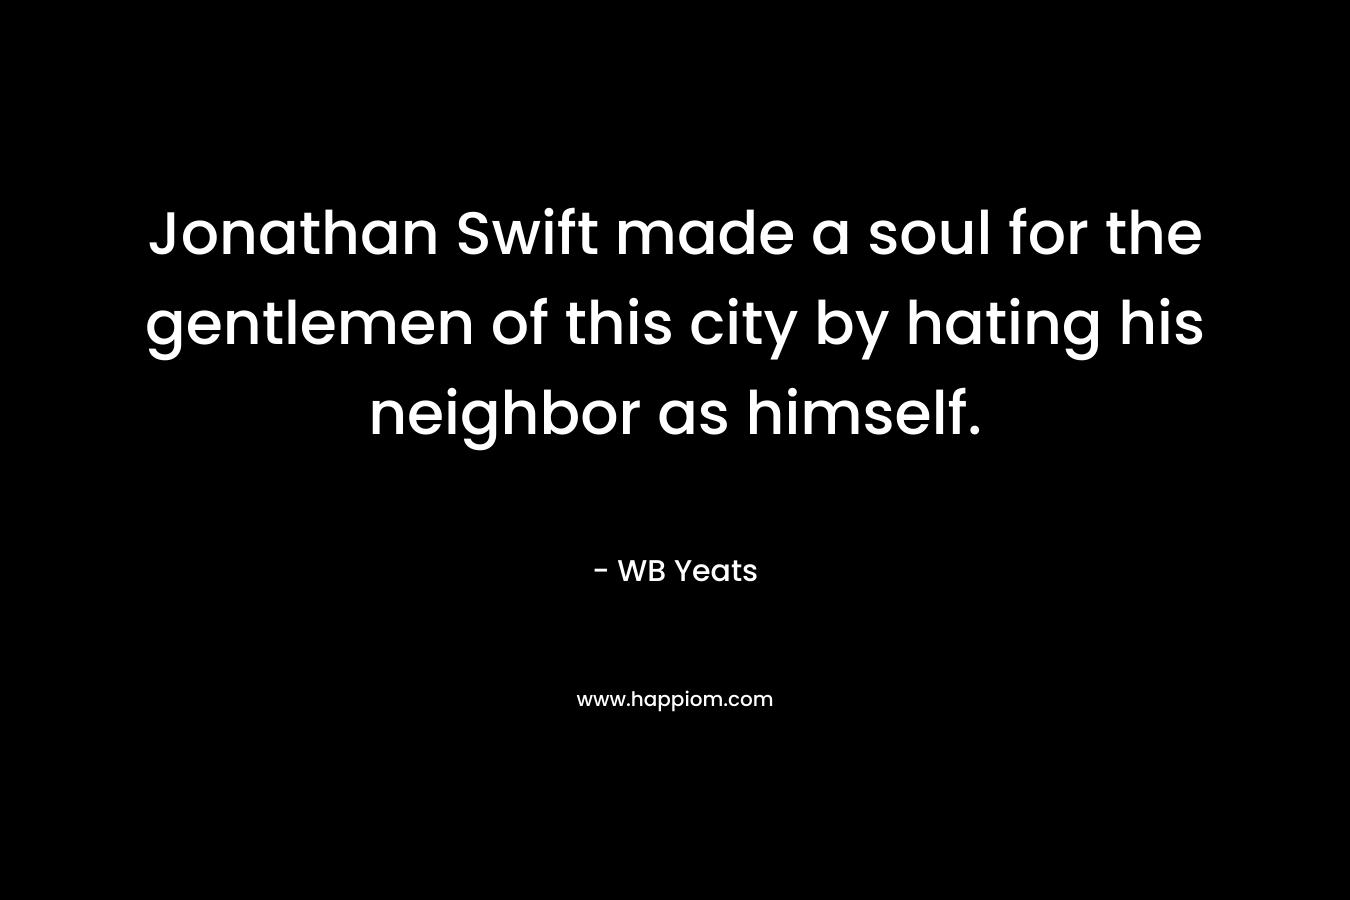 Jonathan Swift made a soul for the gentlemen of this city by hating his neighbor as himself. – WB Yeats